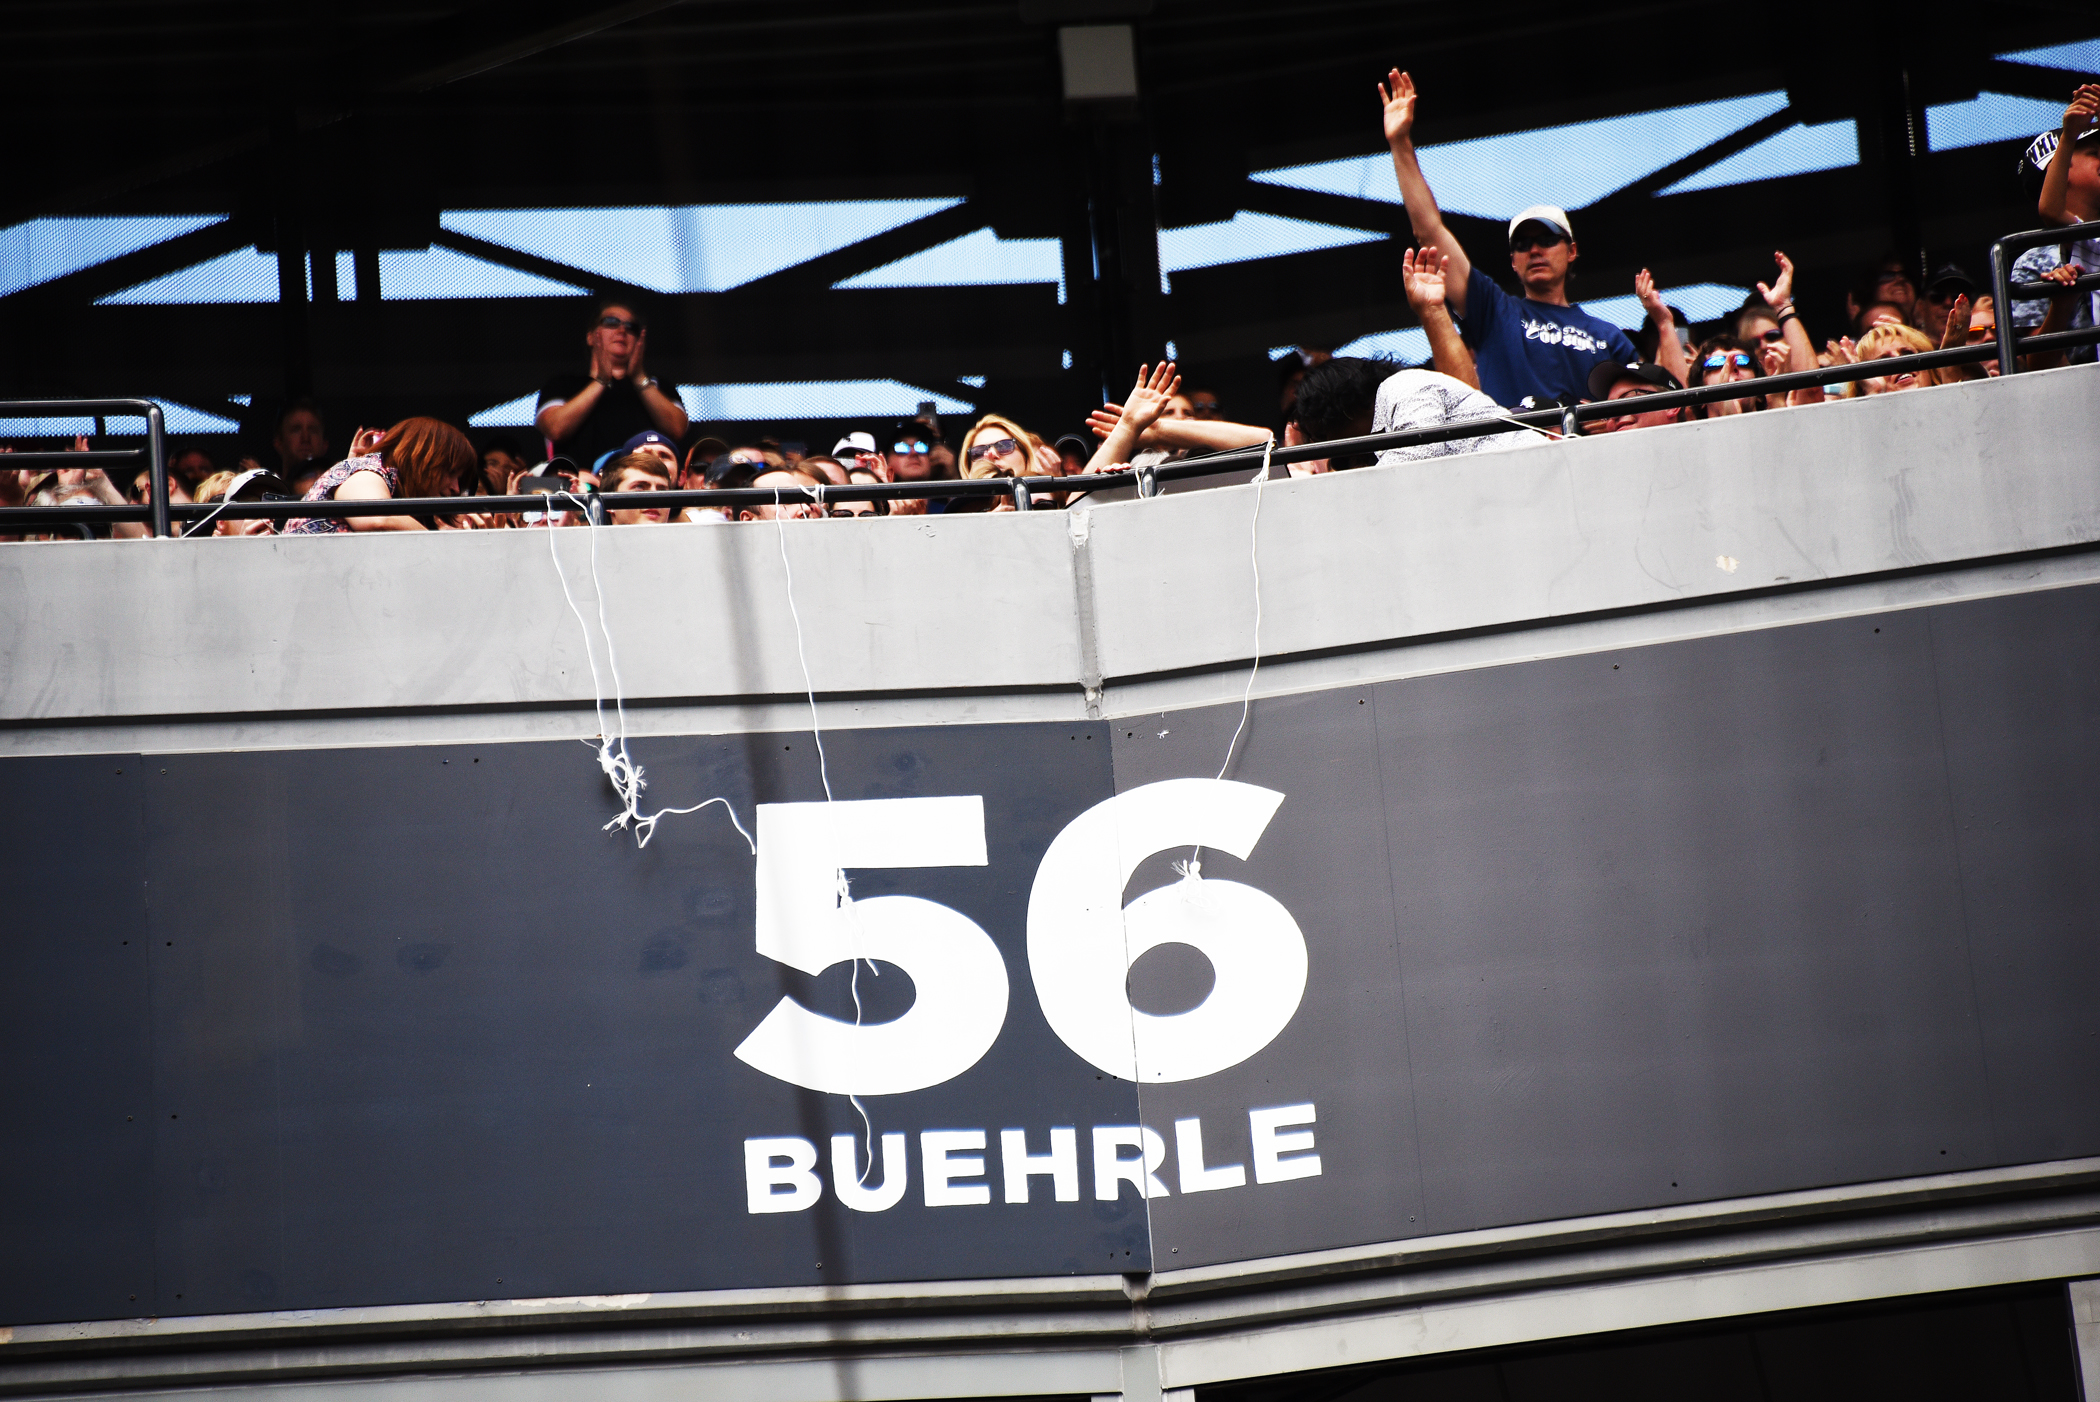 Fans packed the stands as White Sox retire Buehrle's number